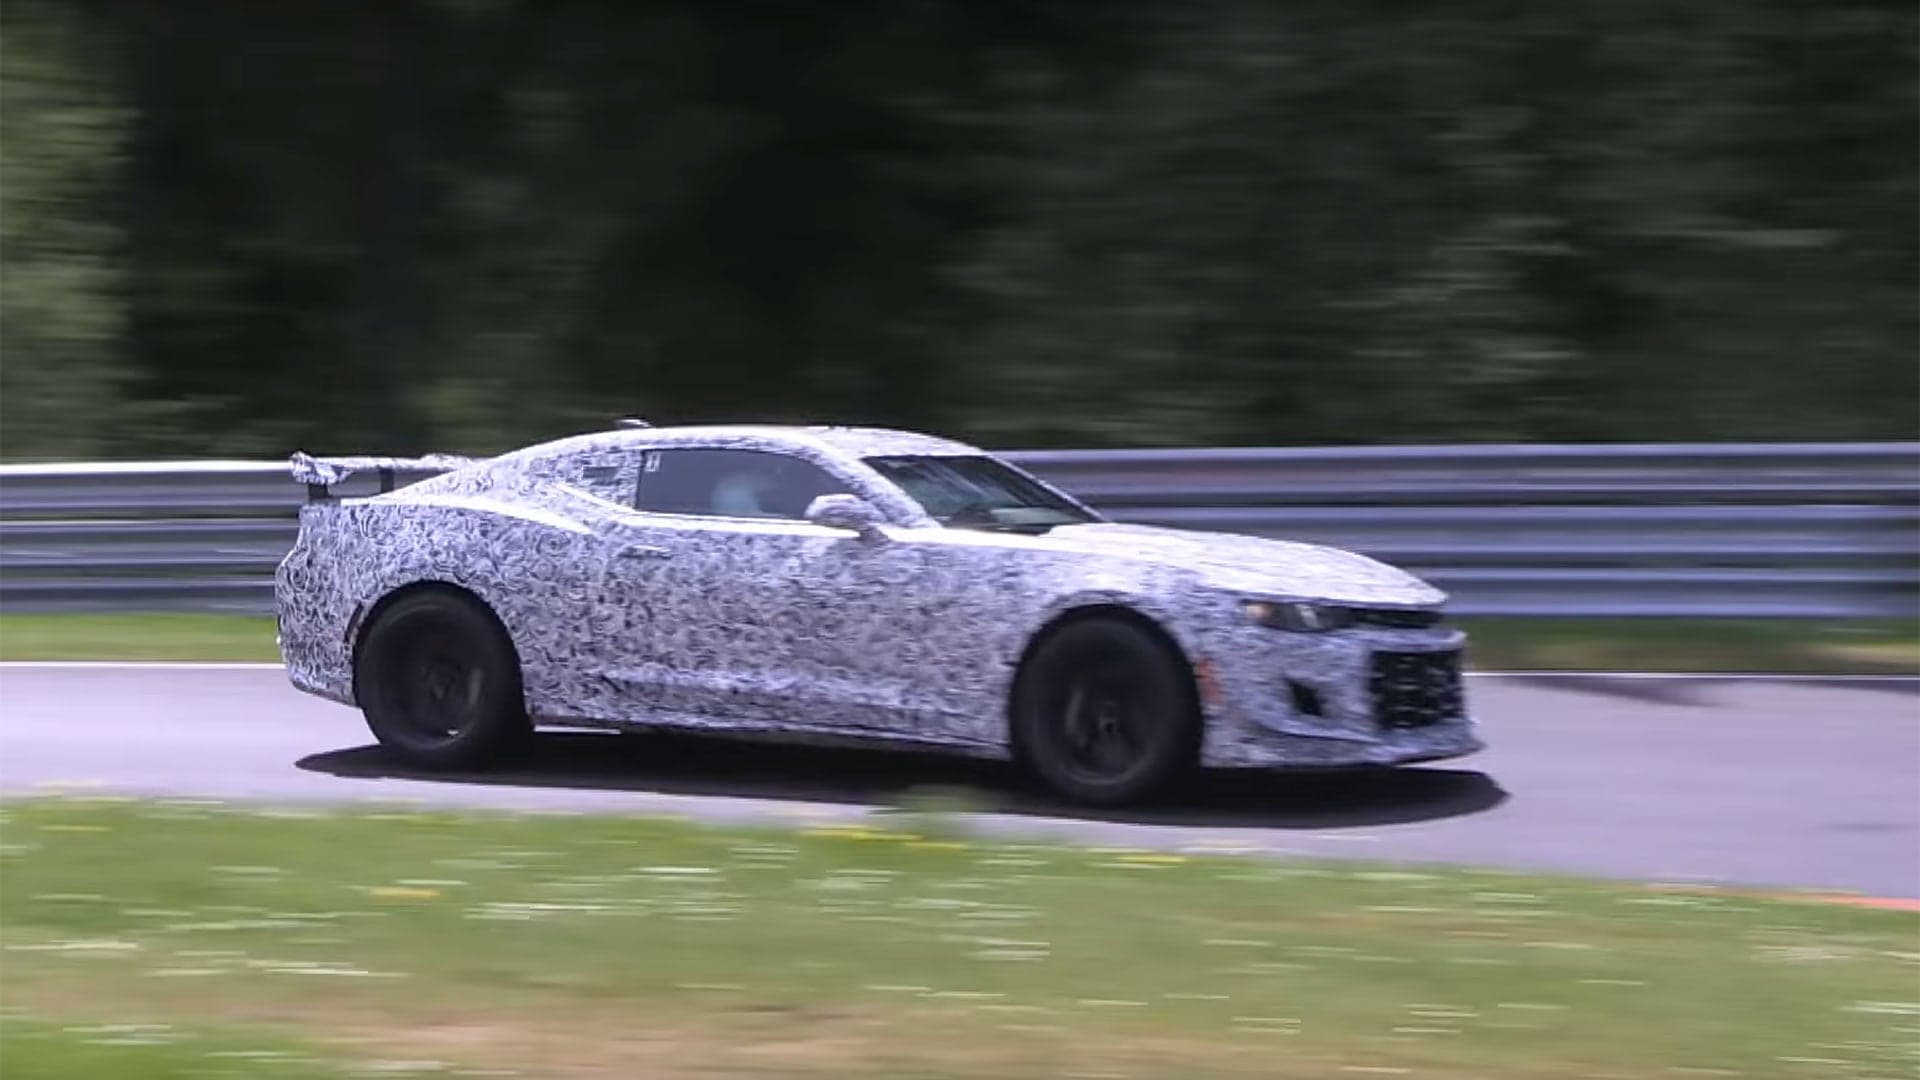 Crashed 2018 Chevy Camaro Z/28 Prototype Was Driving Again the Next Day